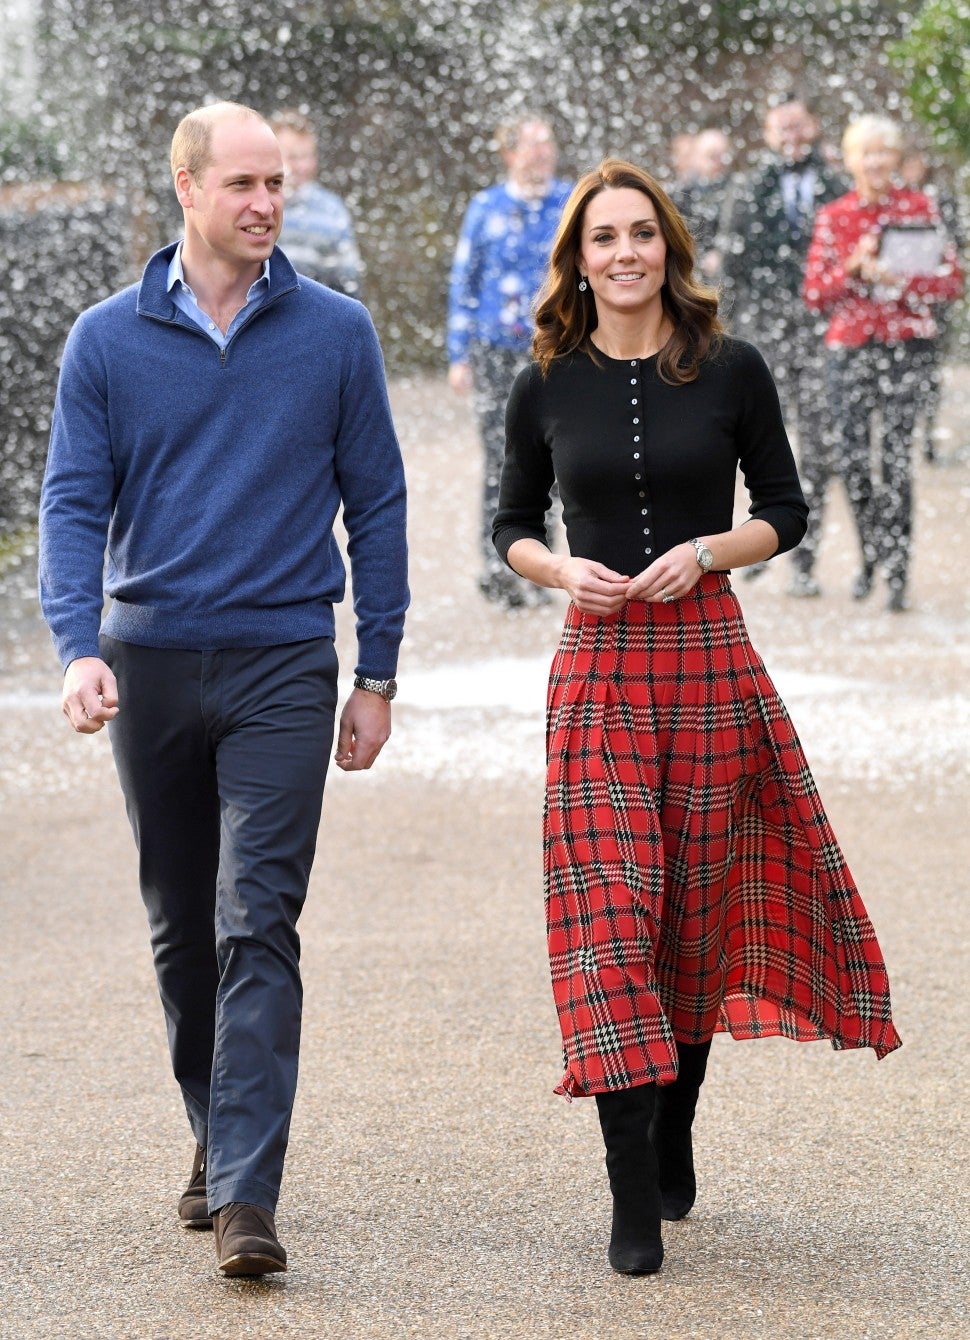 Kate Middleton and Prince William in fake snow